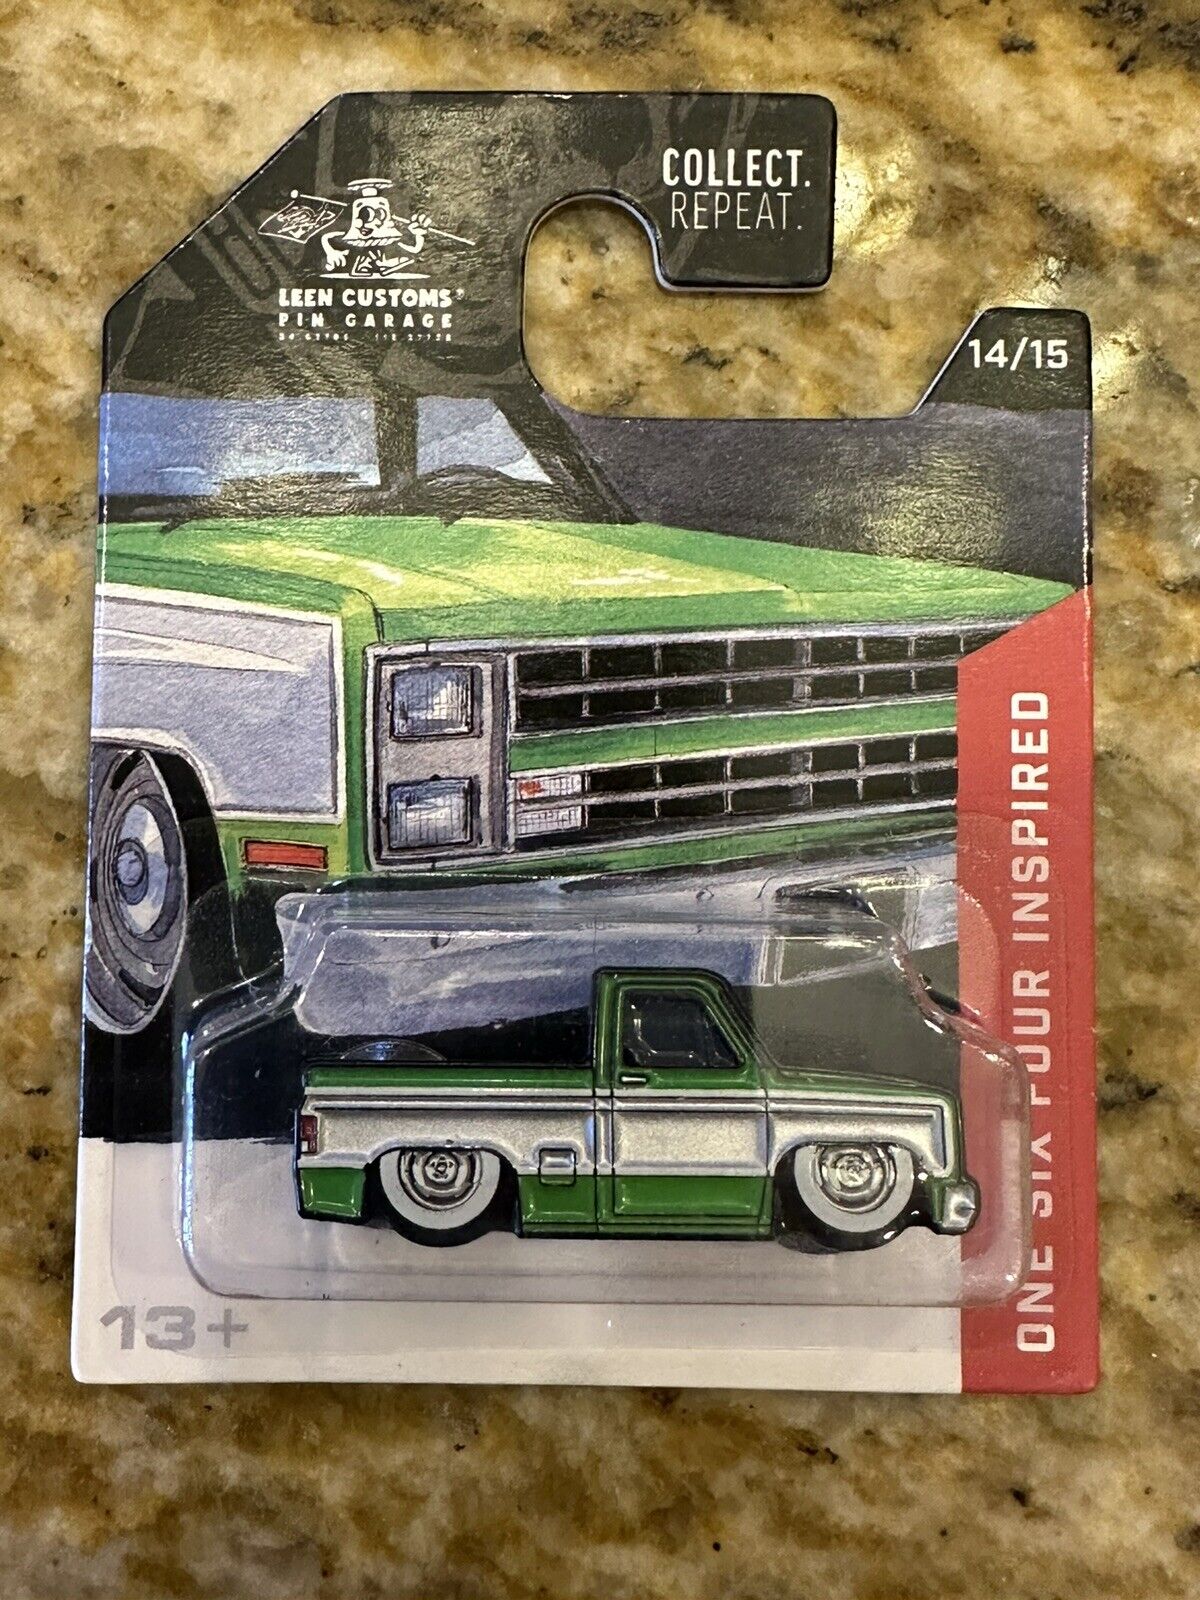 Leen Customs 1:64 Green And White Truck Sealed